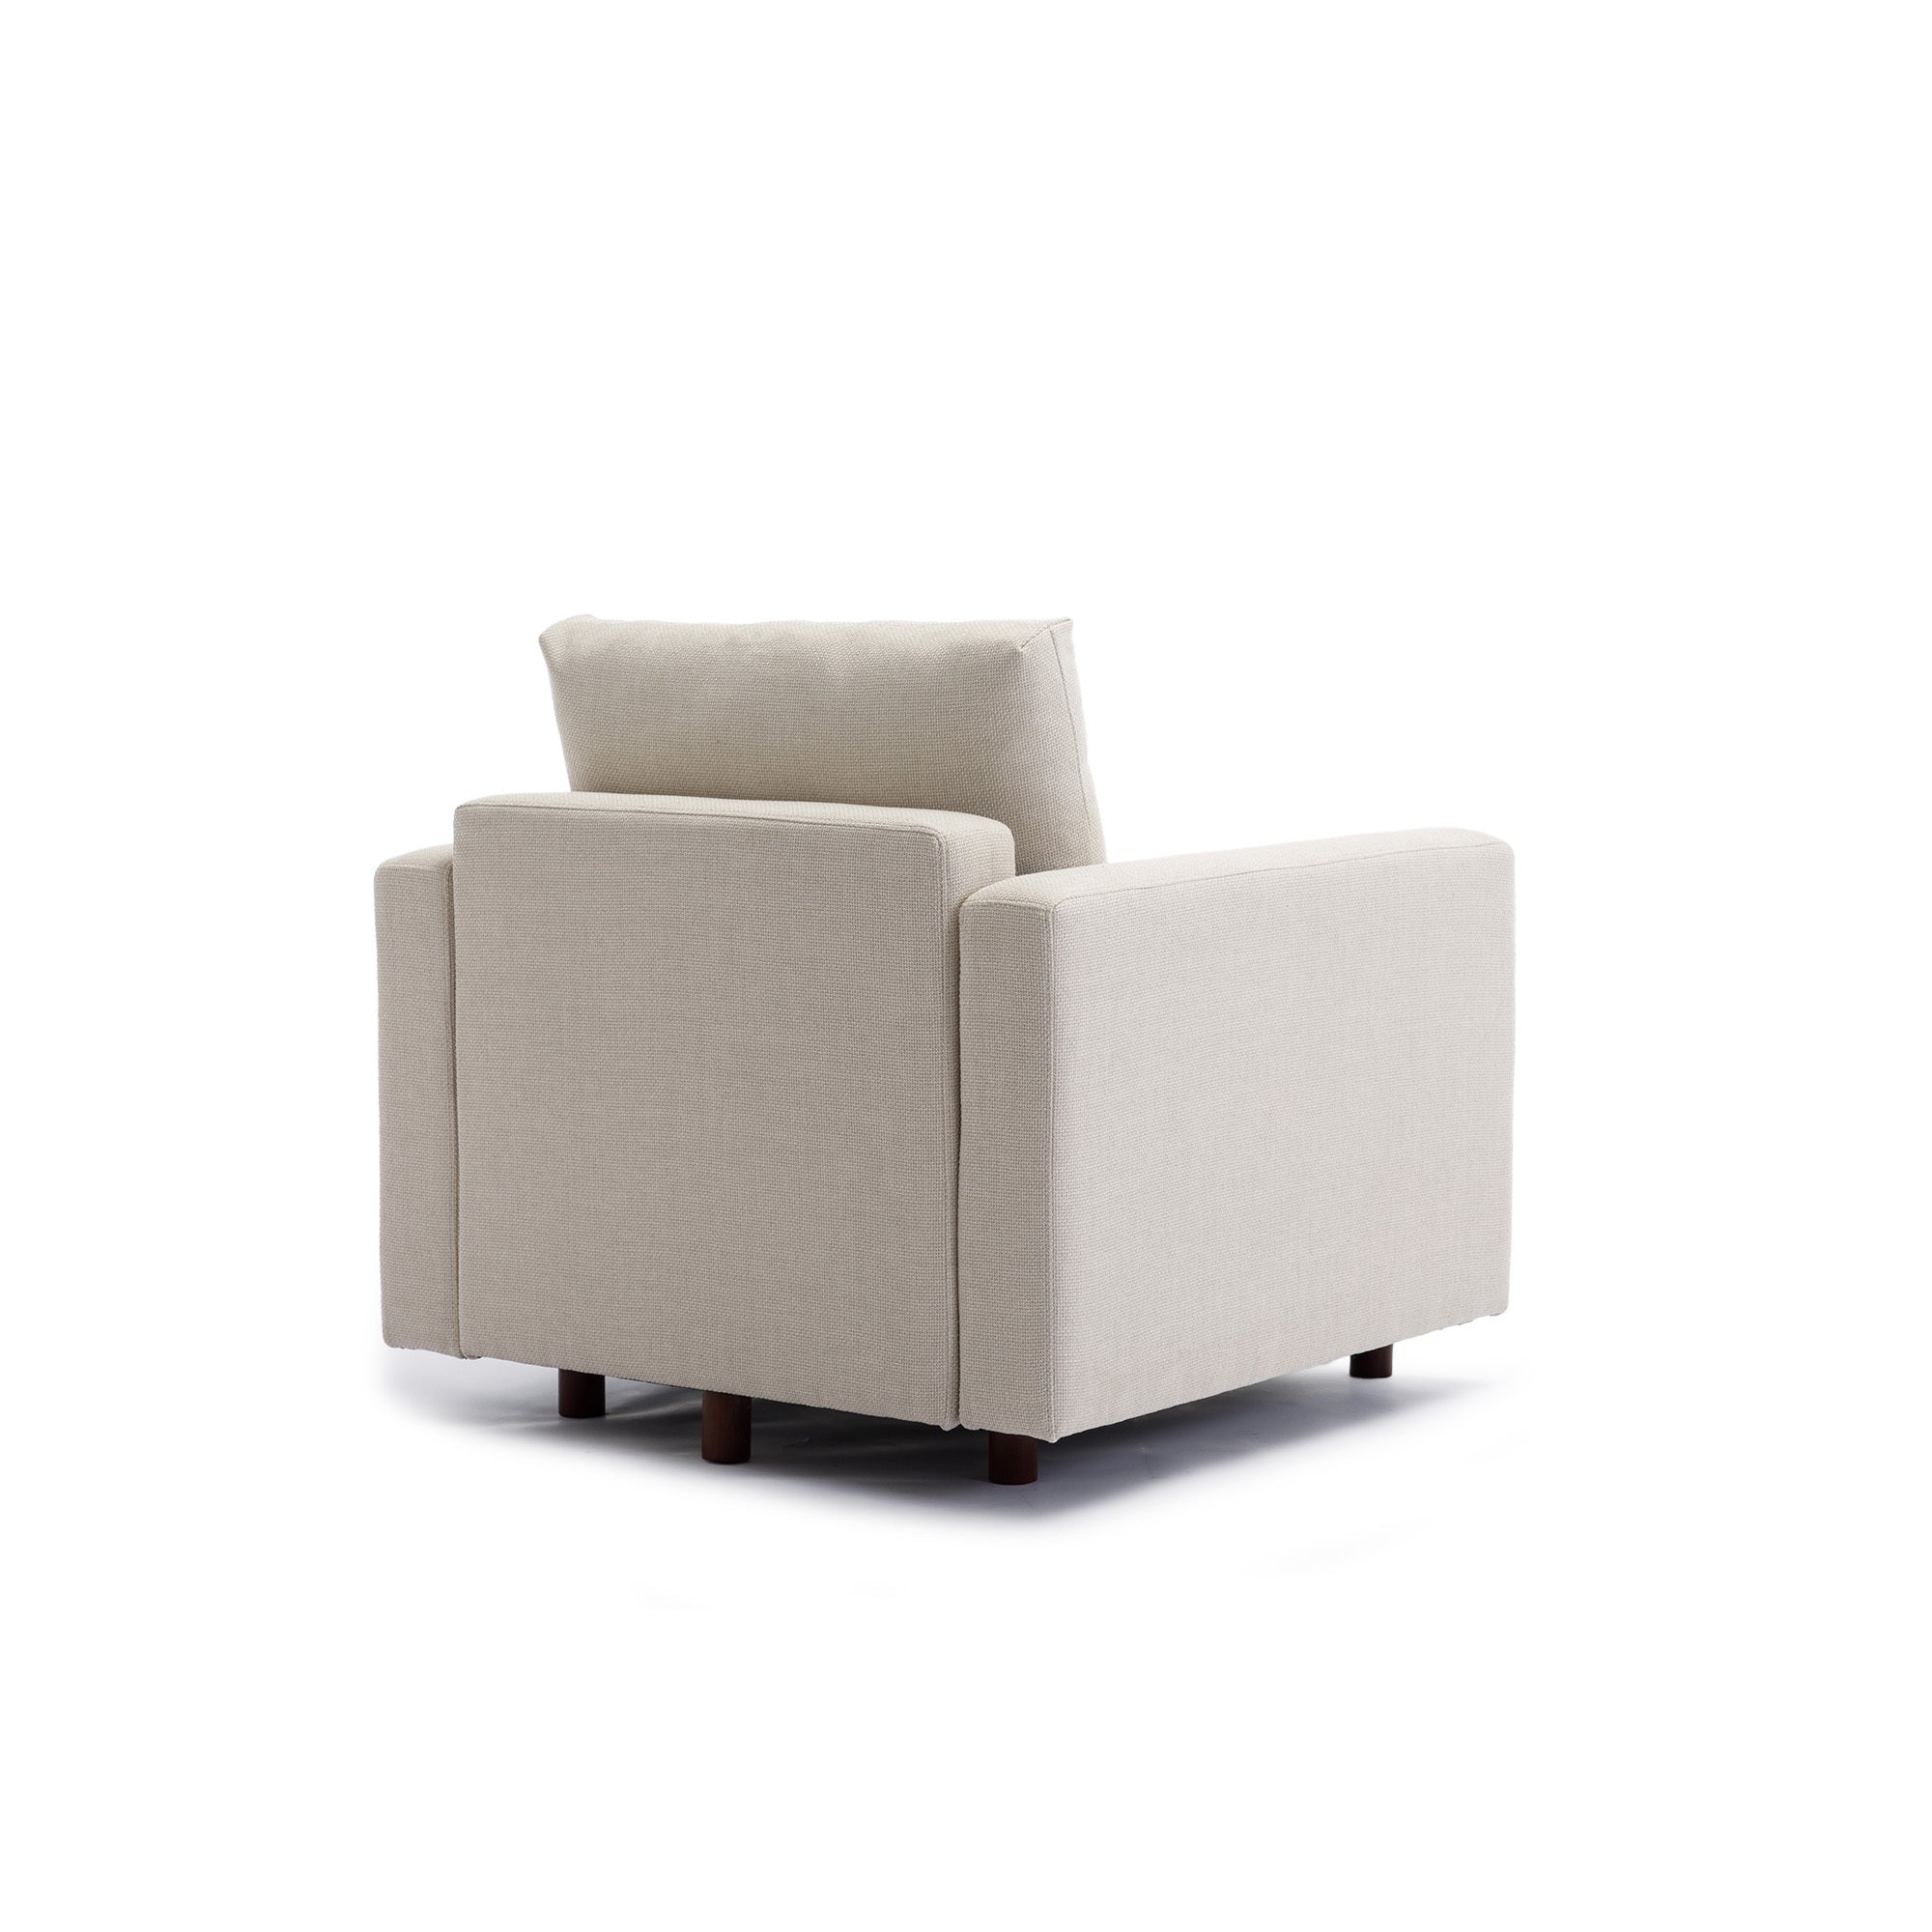 4 Seat Module Sectional Sofa Couch